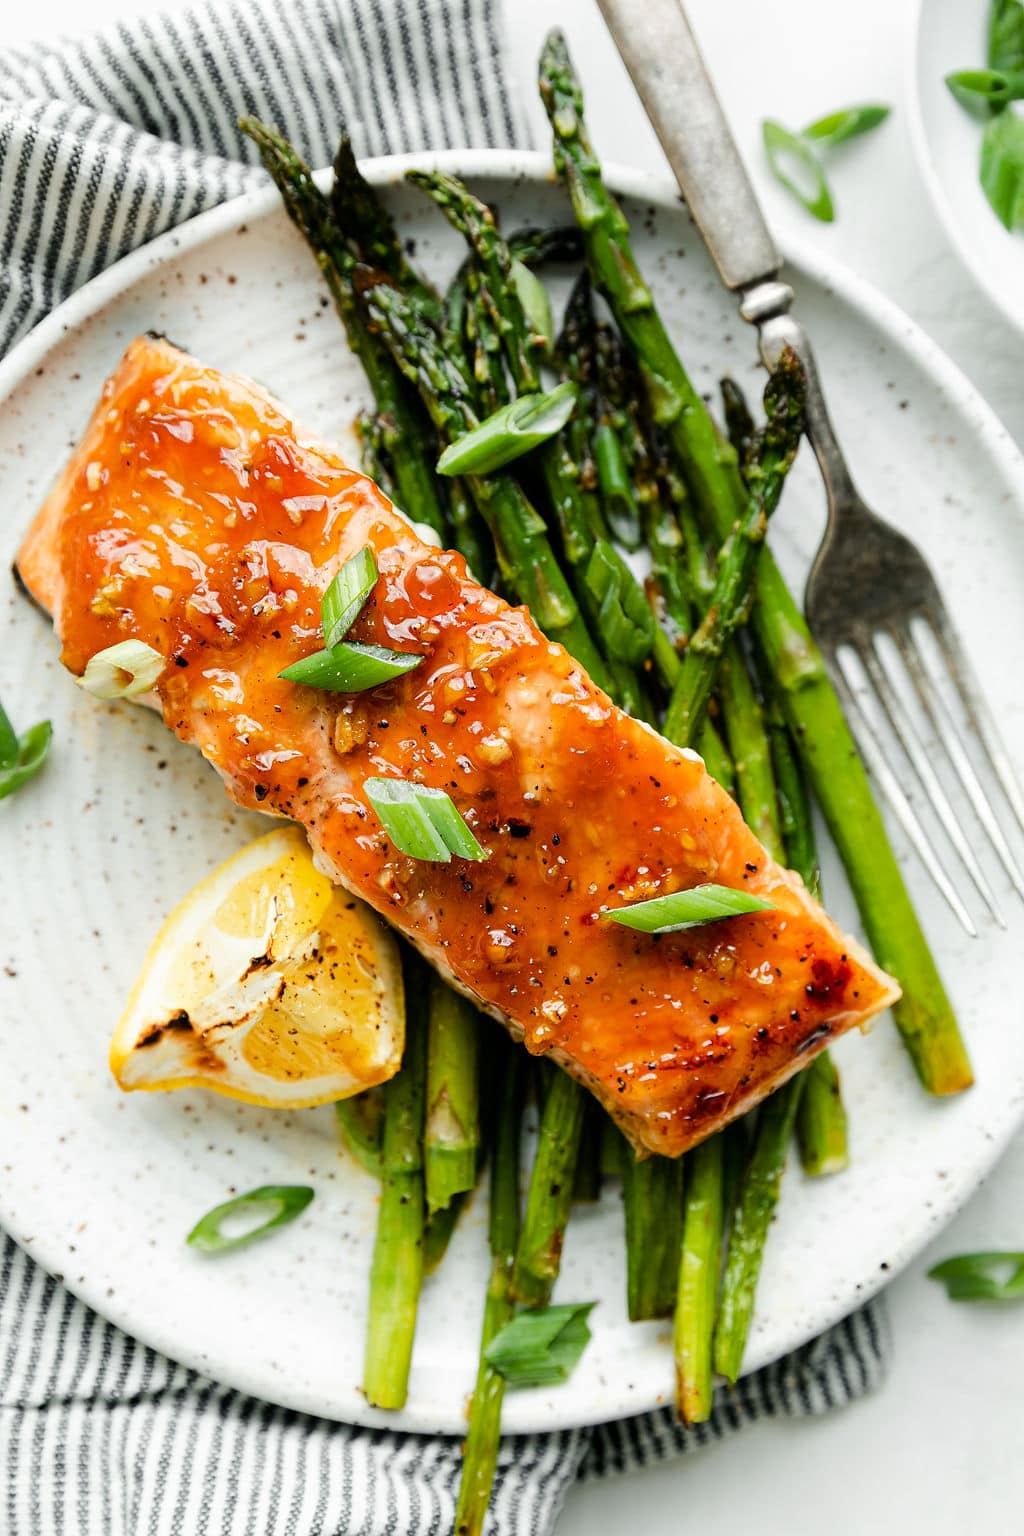 Overhead view honey glazed salmon filet on stone plate with roasted asparagus and lemon wedge.